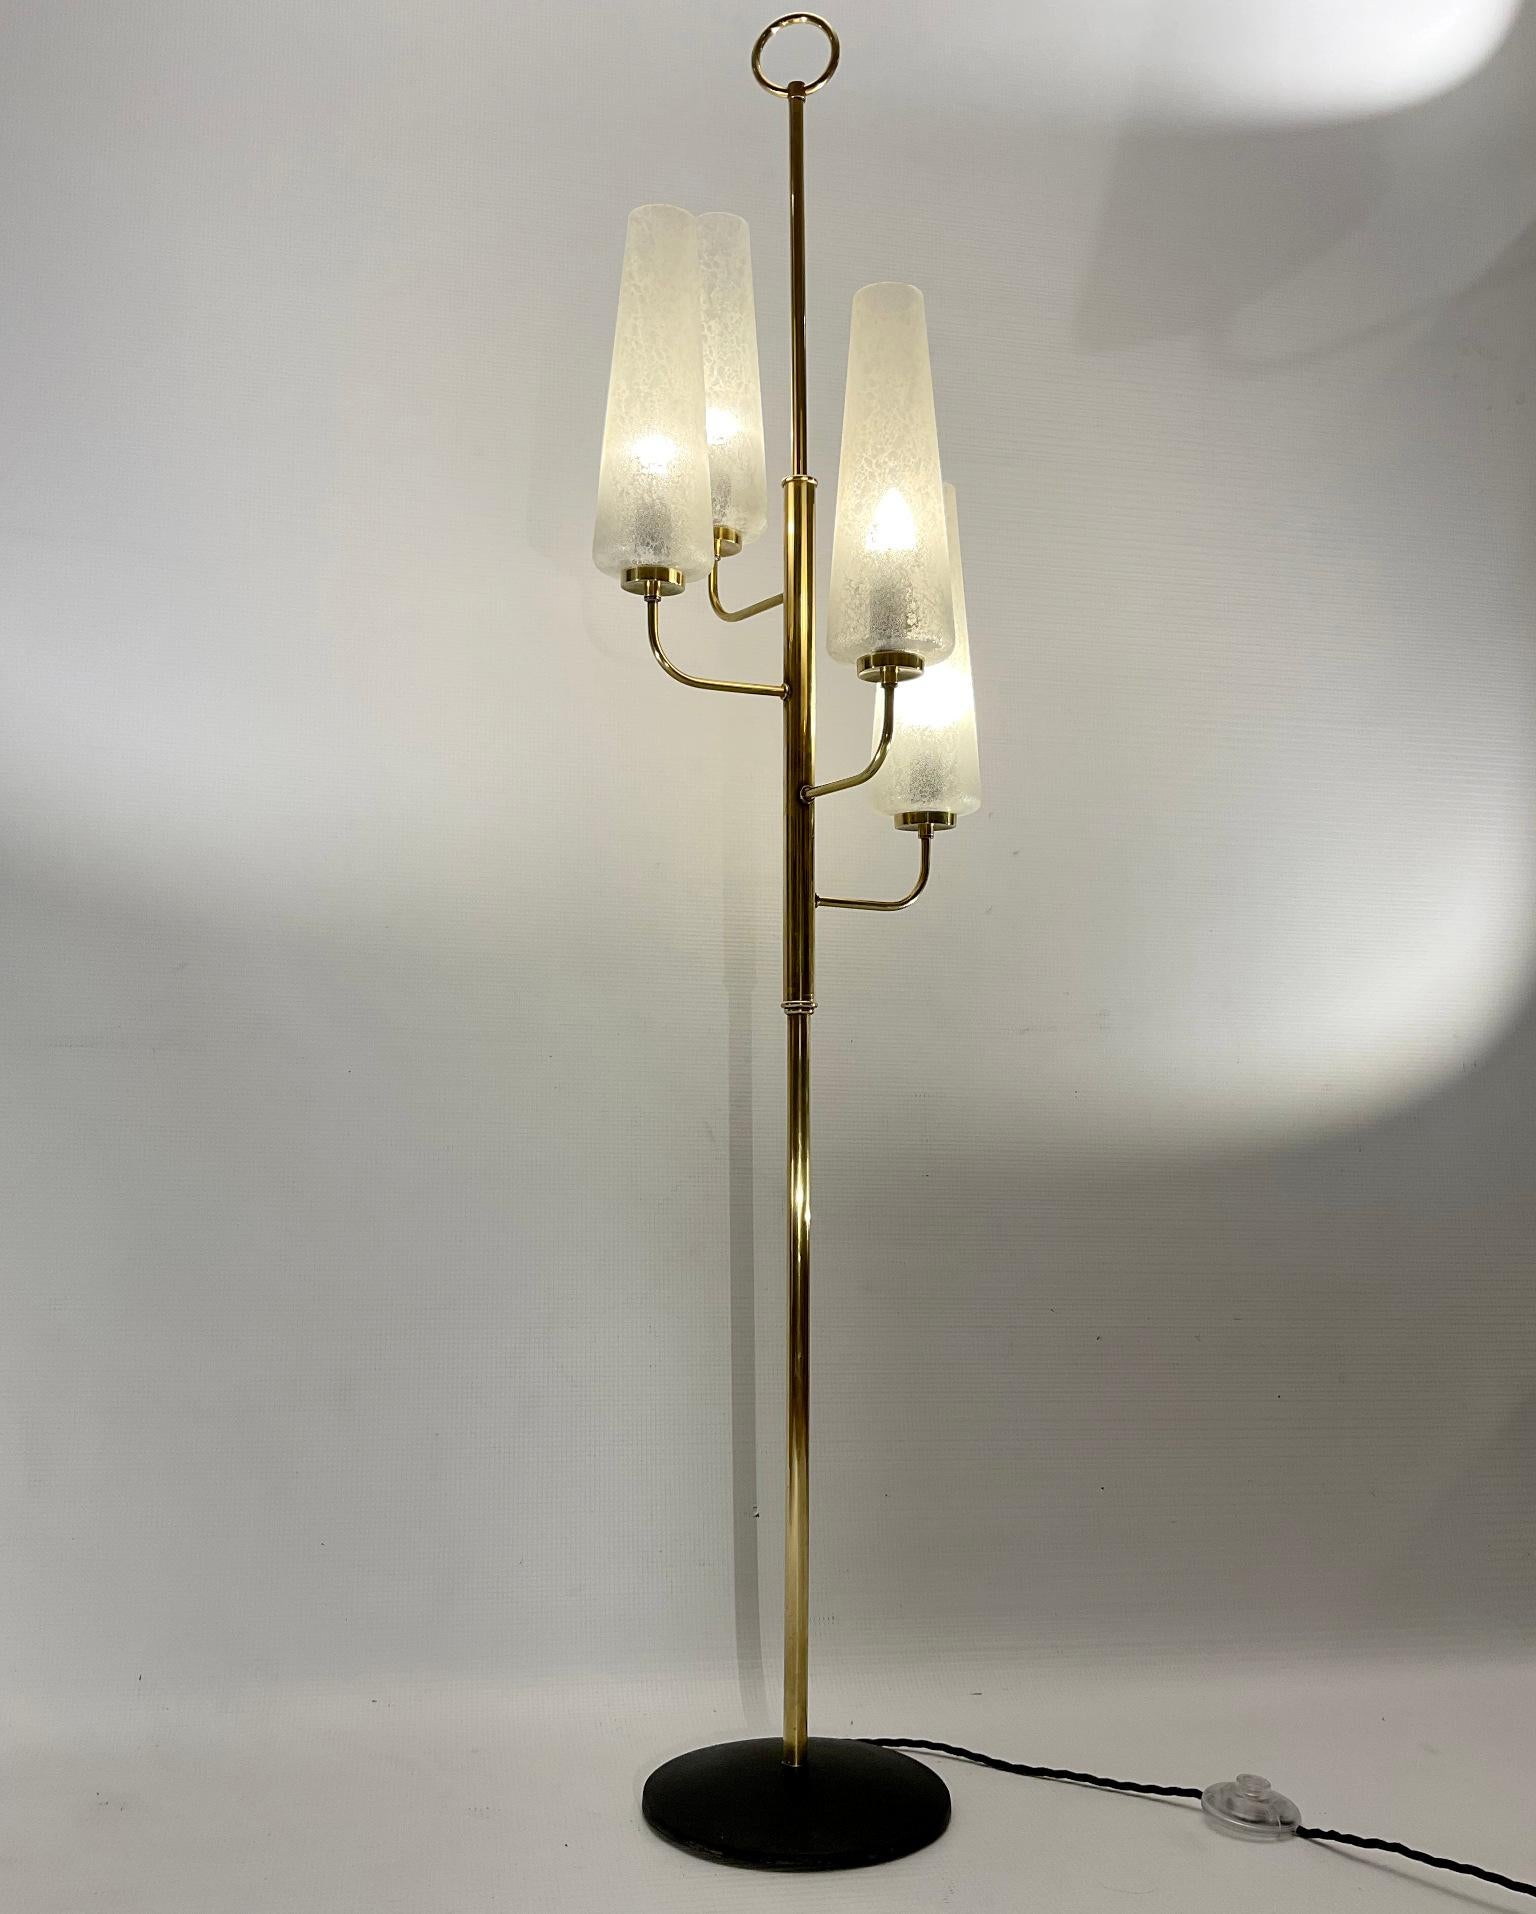 1950s French floor lamp with four branches with four frosted glass shades.